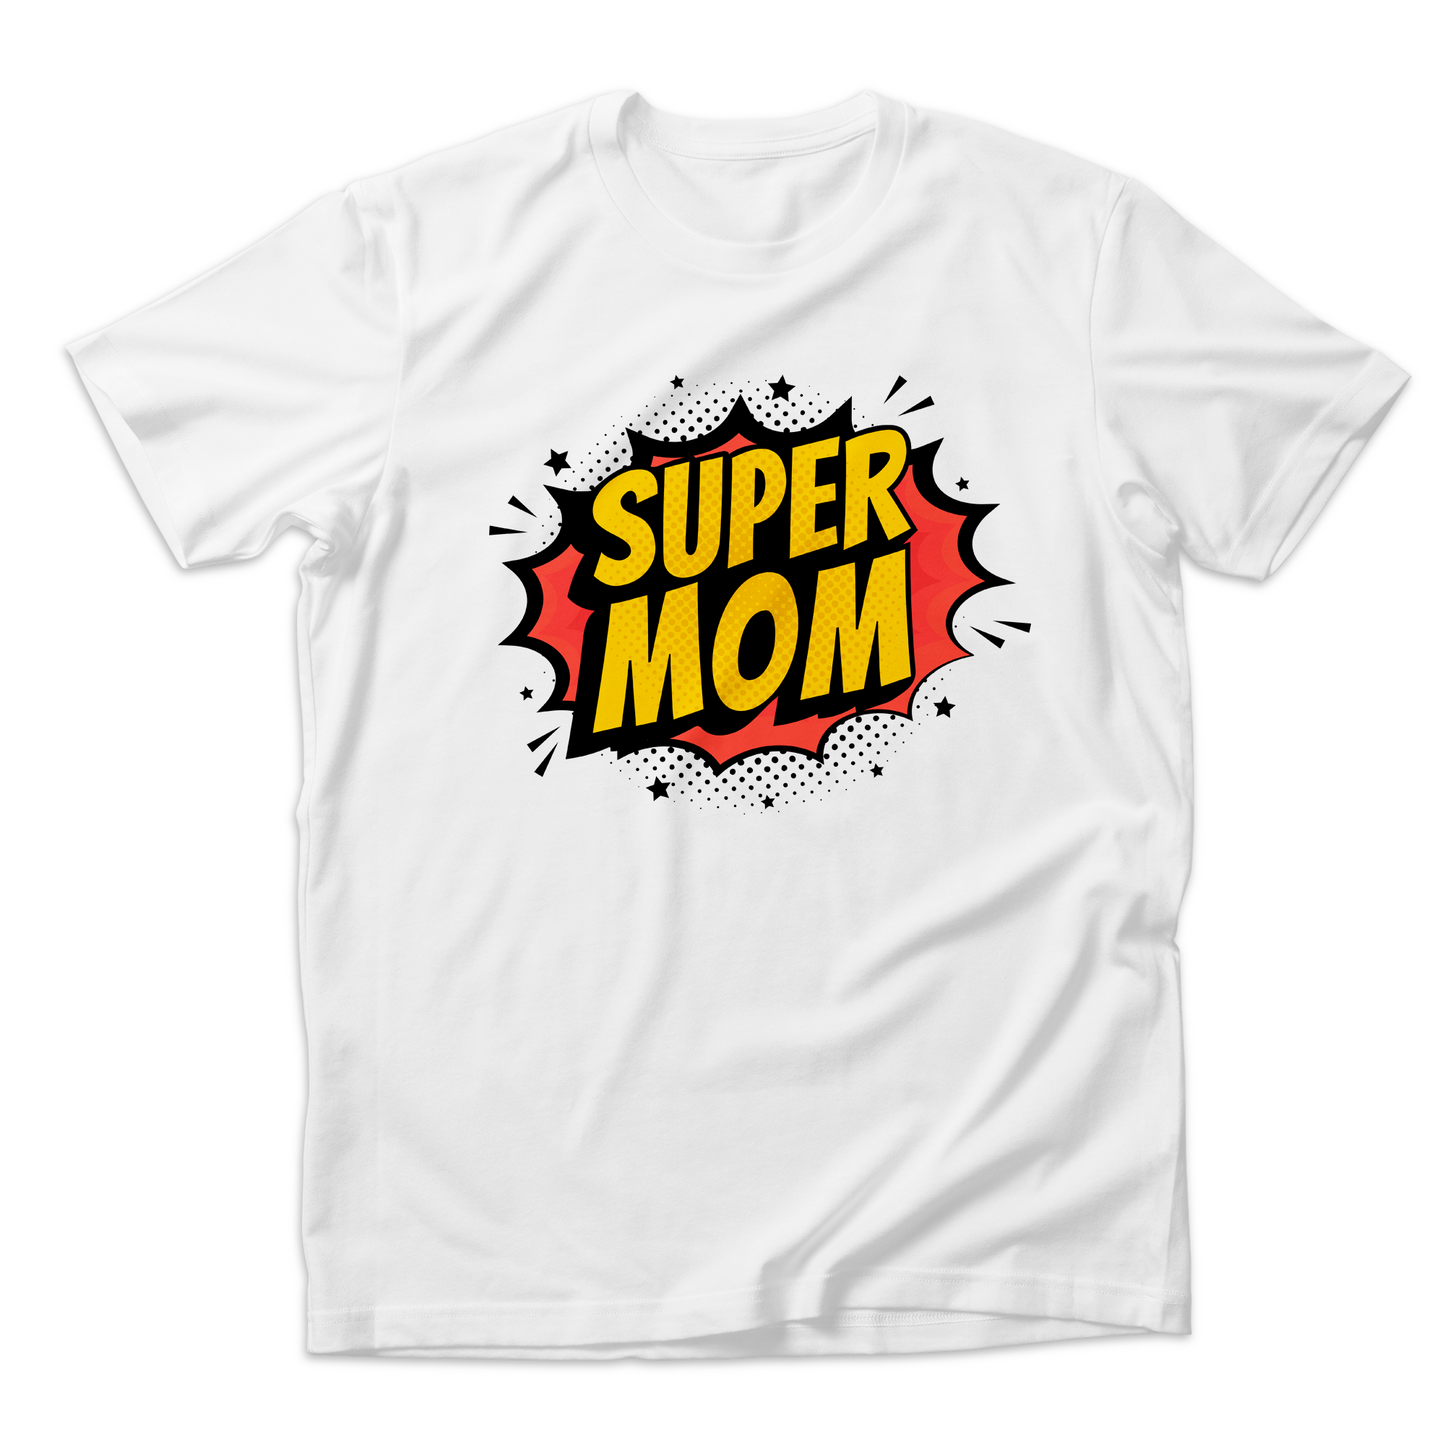 Personalized Matching Mom & Baby Organic Outfits - Superhero Family